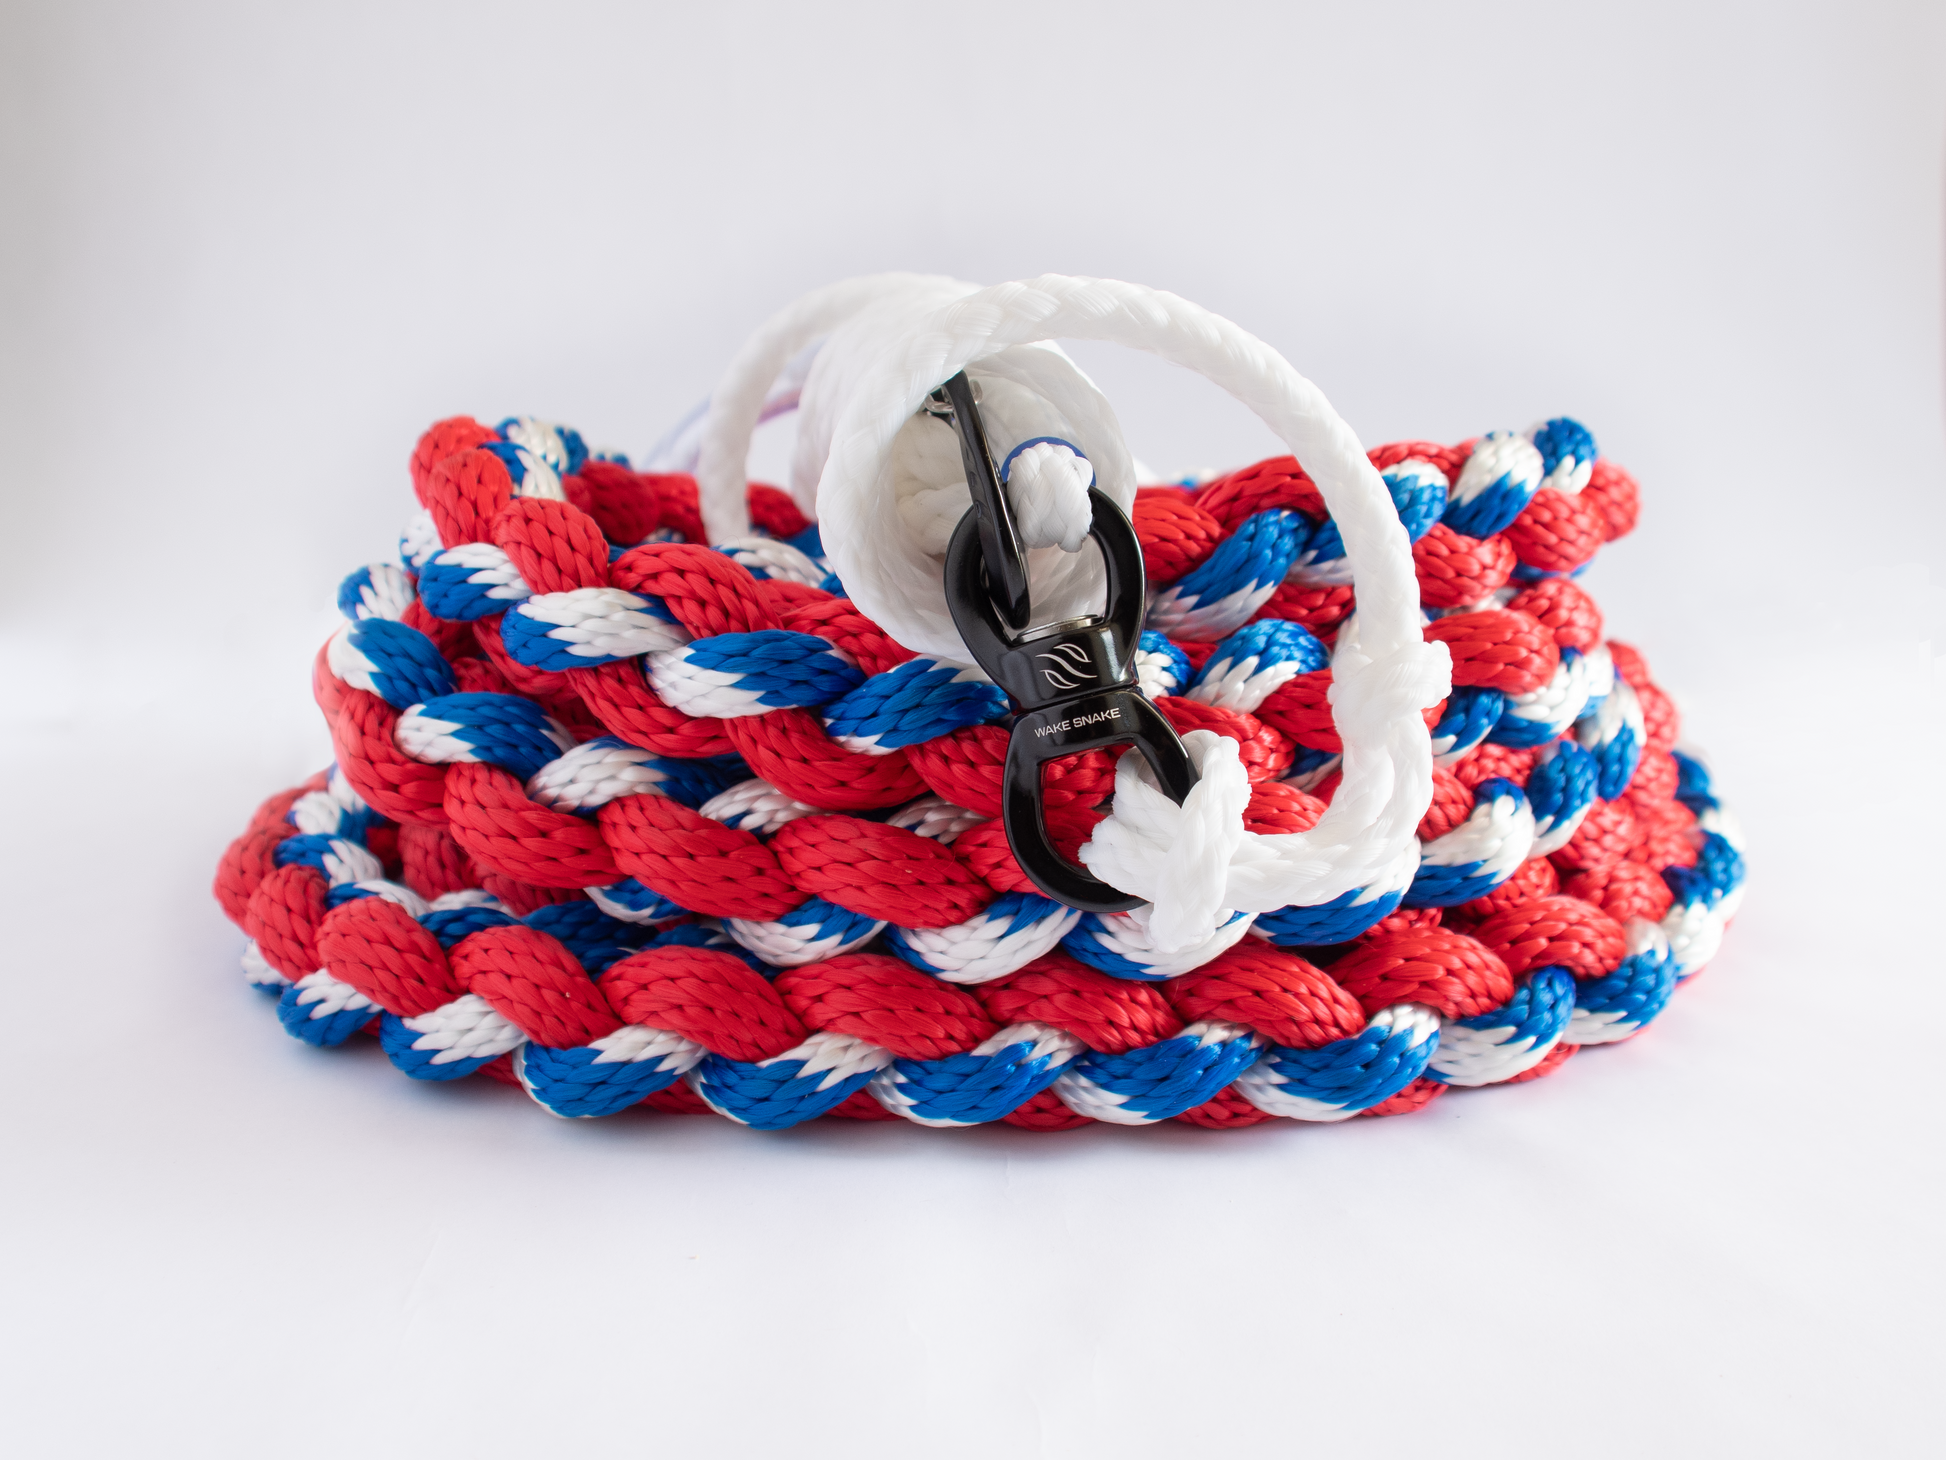 Red white and blue wake surfing rope used to pull a rider behind a boat